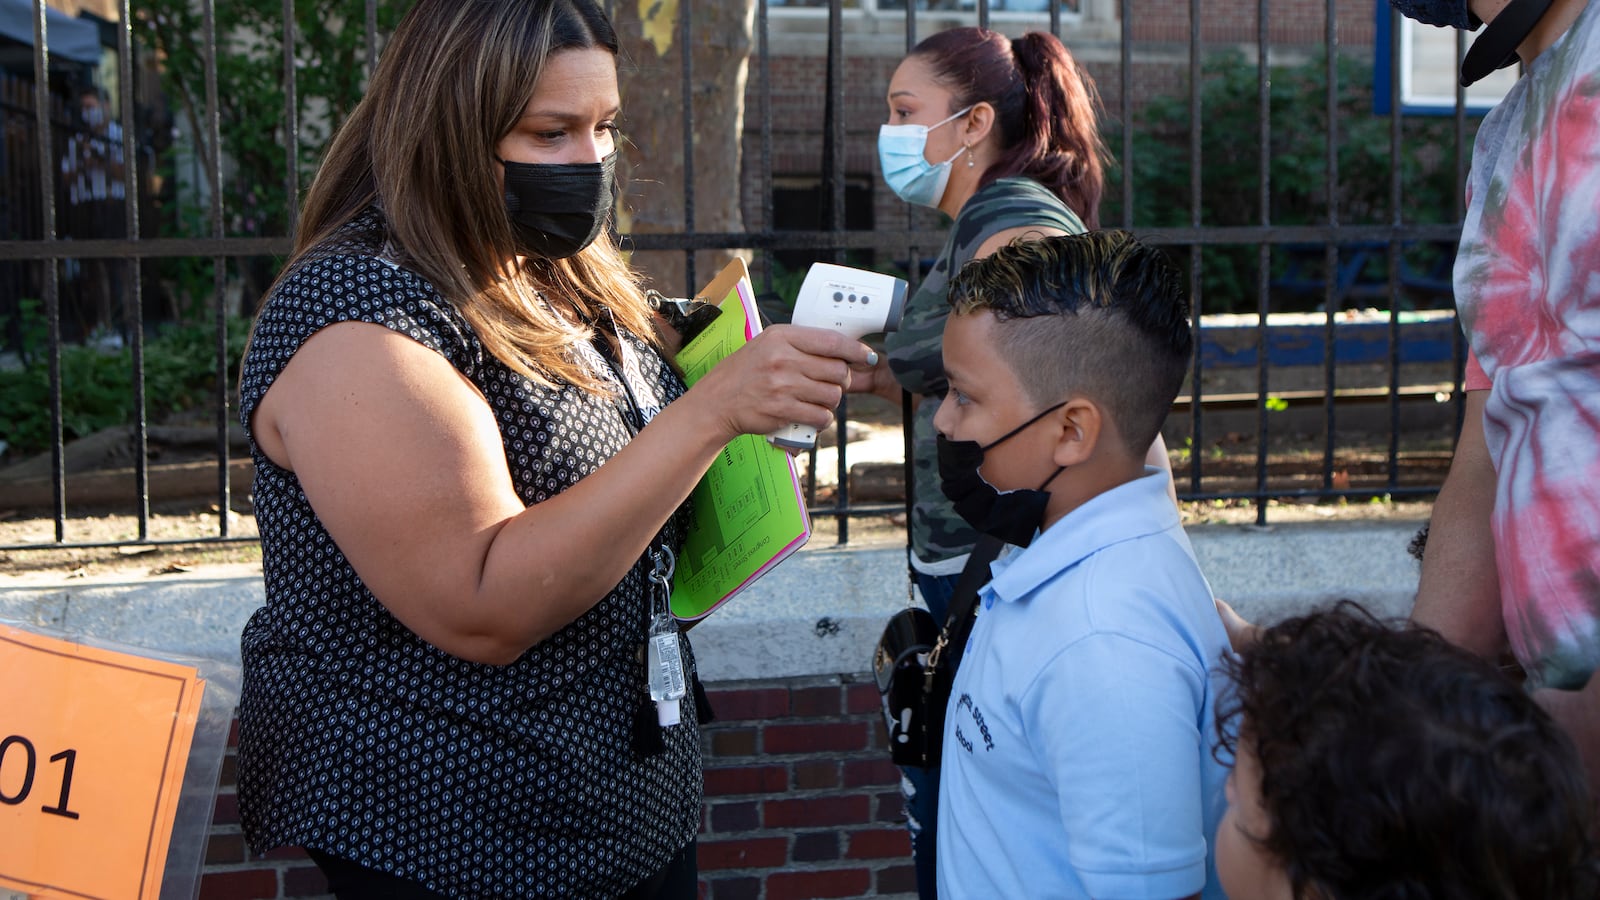 A woman checks a boy’s temperature with a digital thermometer as parents bring their students to school.